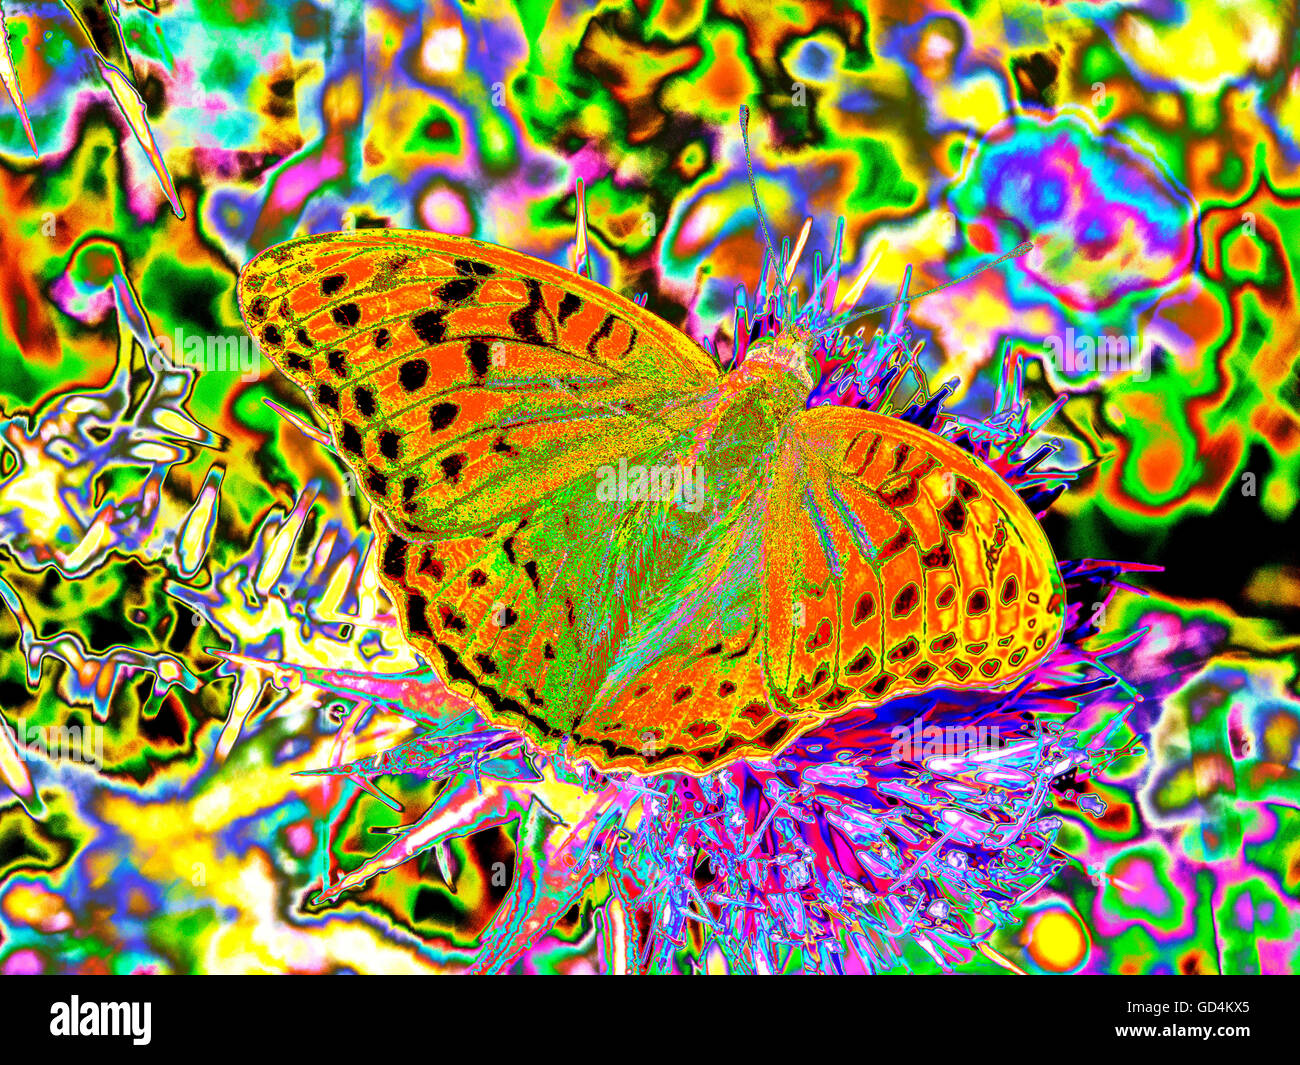 A Fratillary butterfly gathering nectar on a flower on Lesvos, Greece. Stock Photo